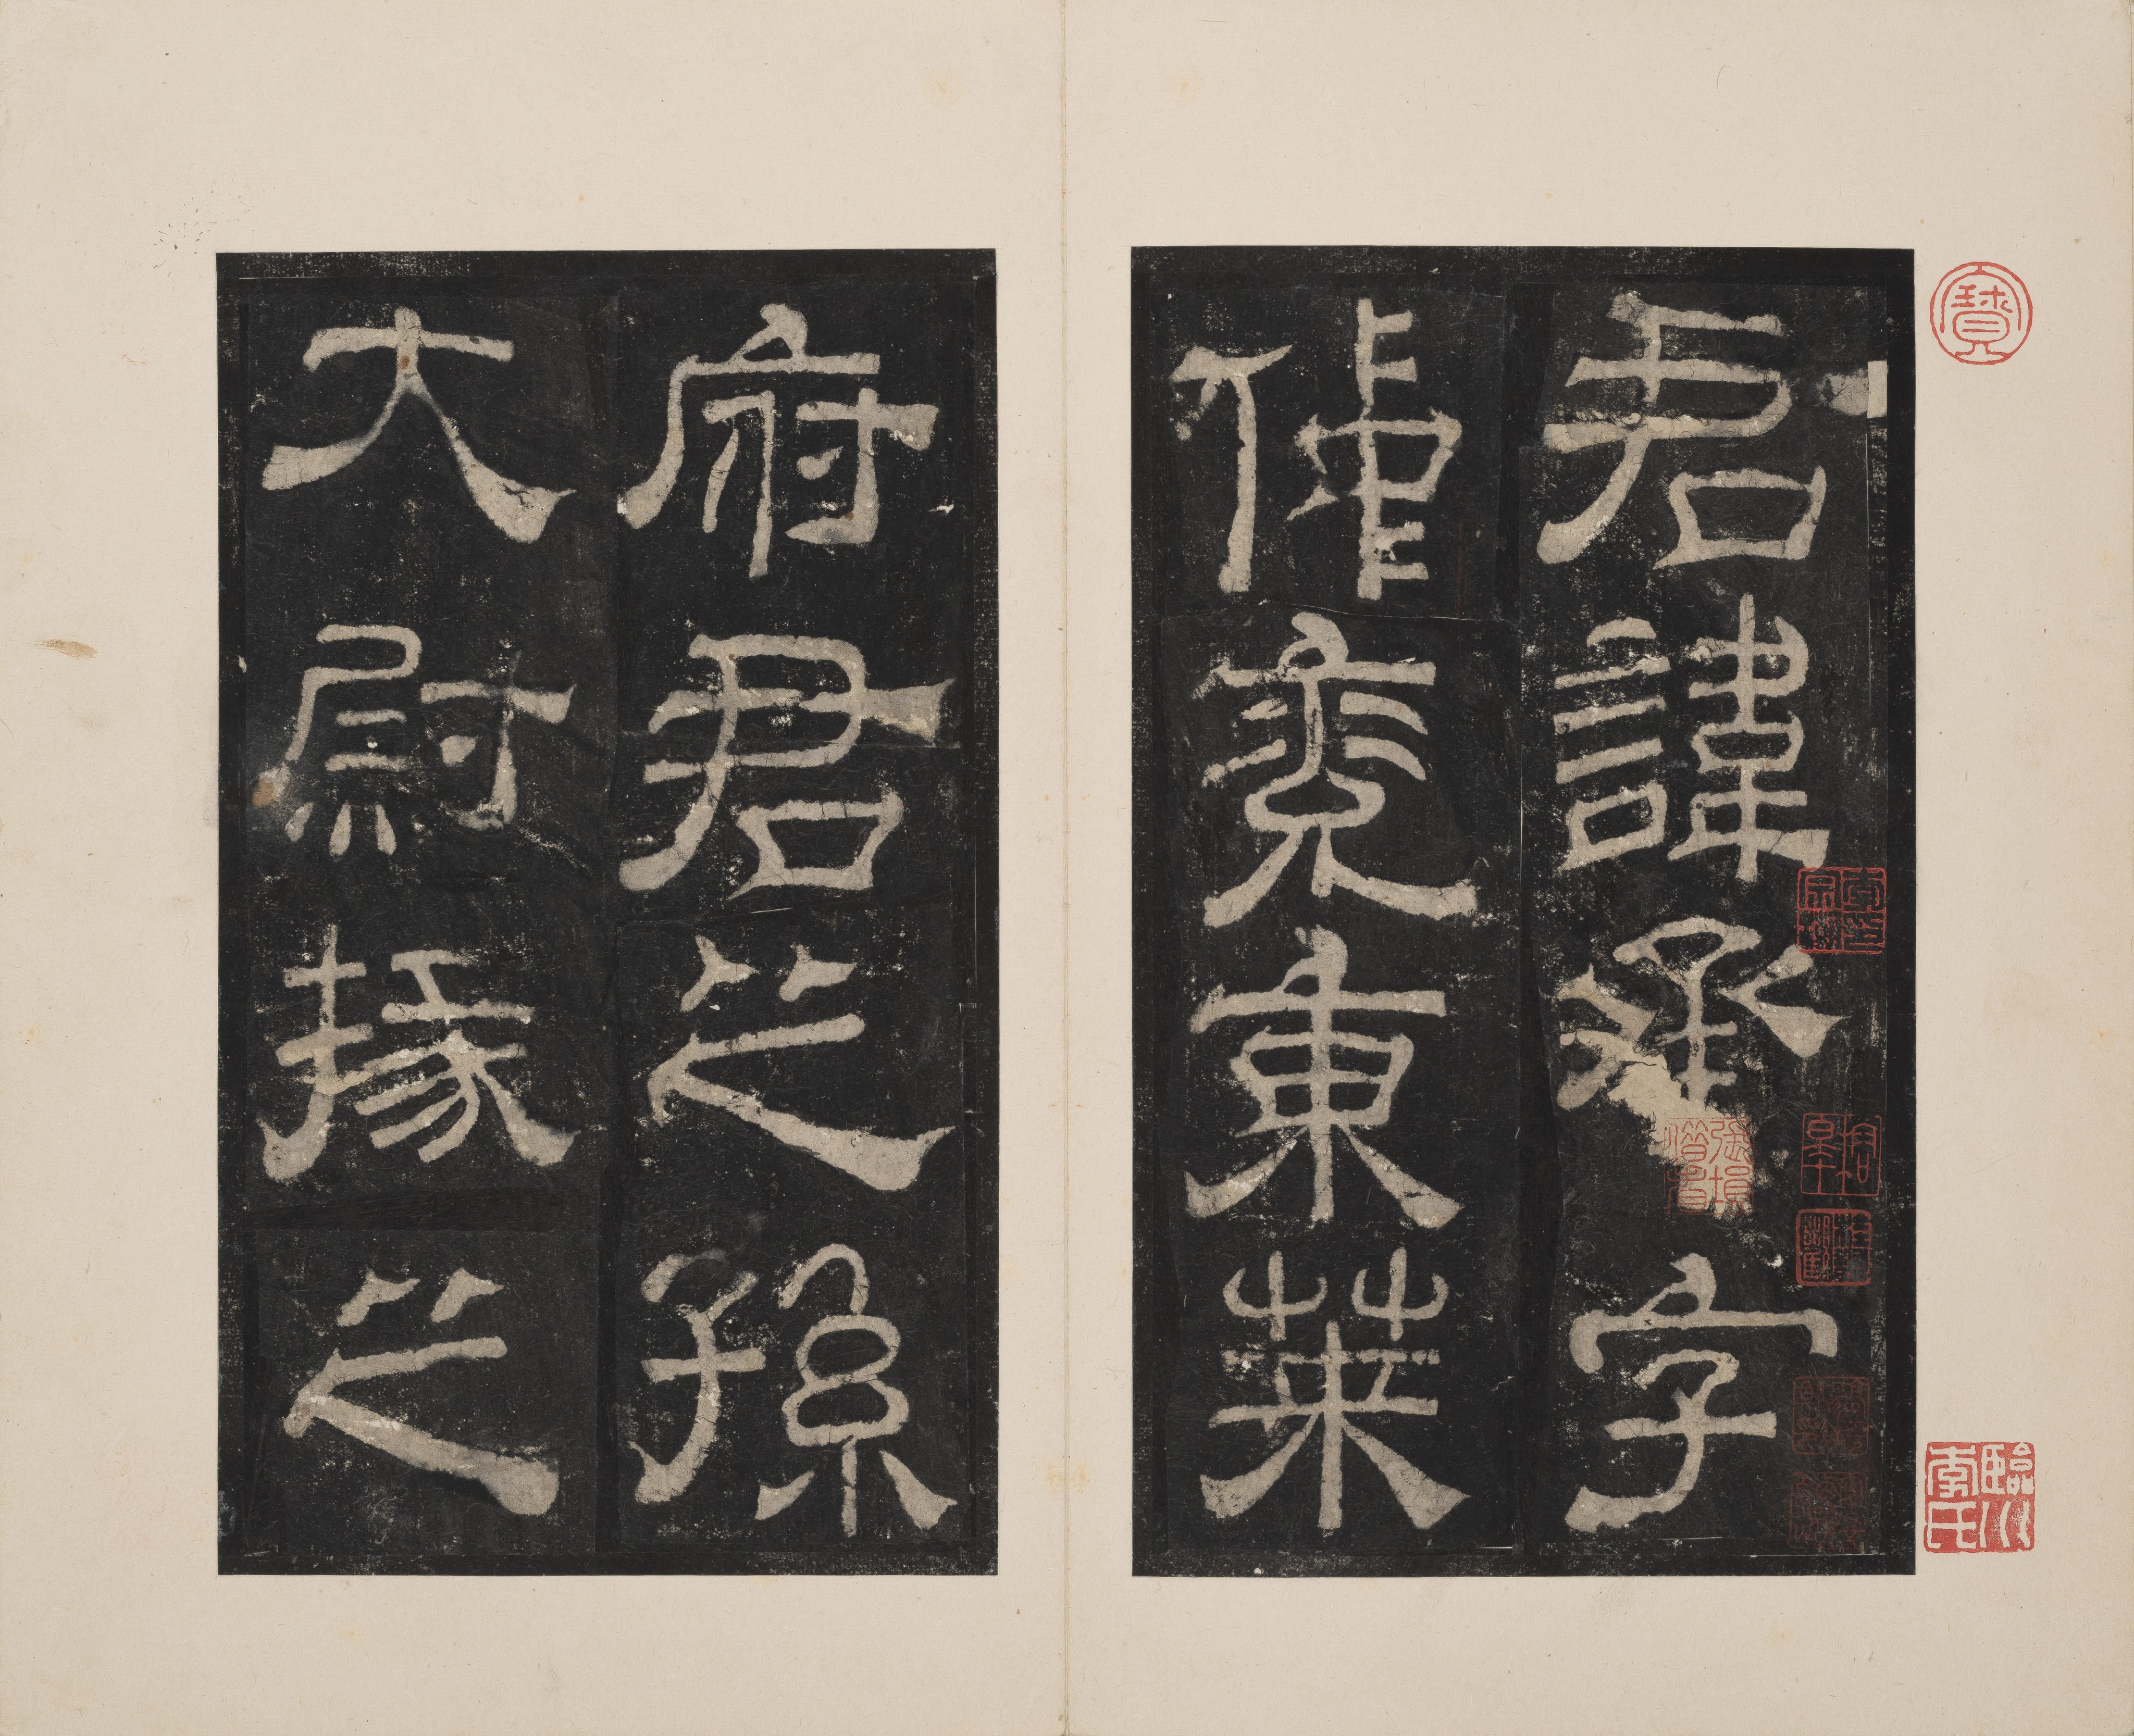 The “Stele for Xia Cheng” ink rubbing, attributed to Chinese calligrapher Cai Yong, can be found in the collection of Chinese University of Hong Kong’s Art Museum. Picture: Art Museum, CUHK